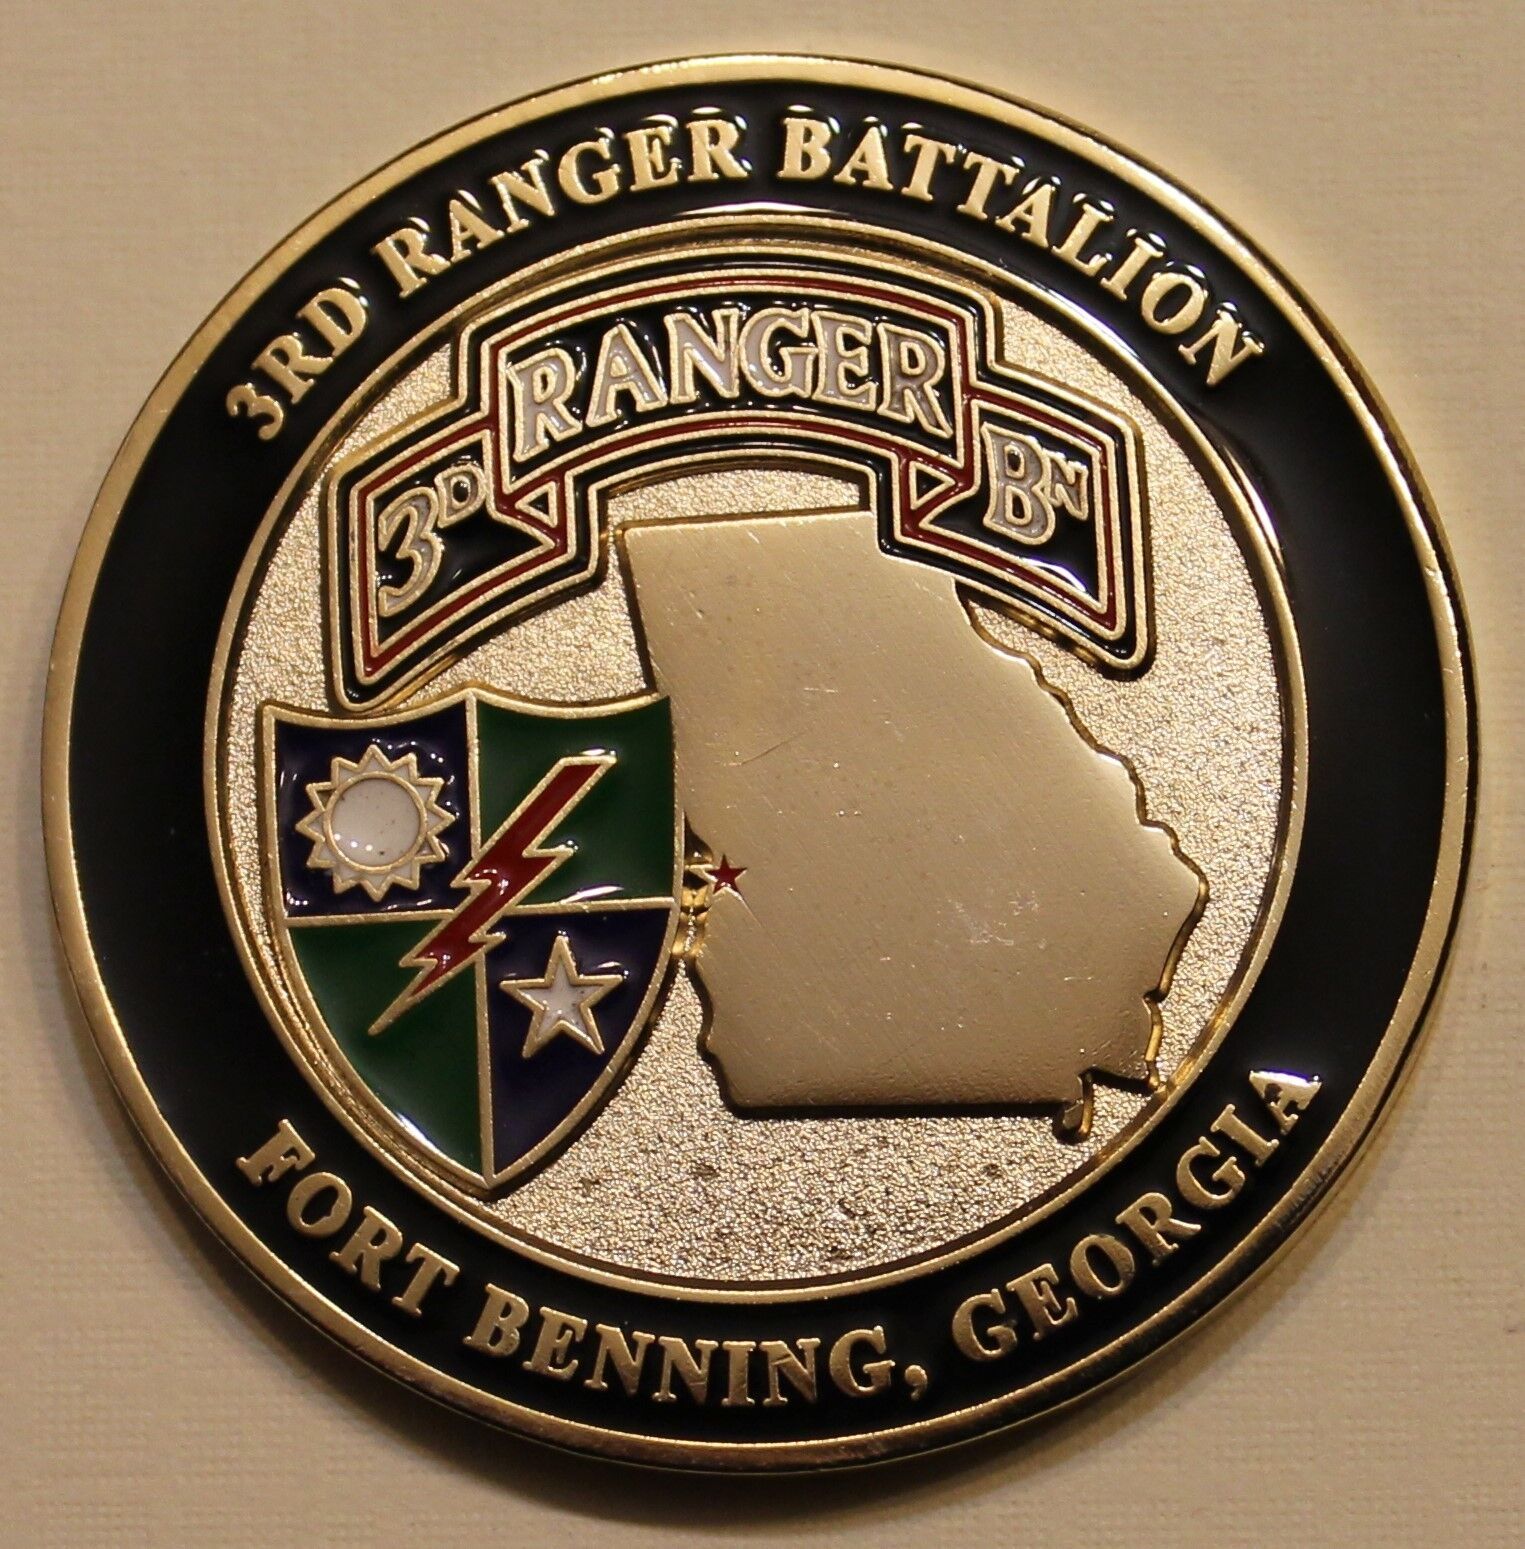 3rd Ranger Battalion Ft Benning Rangers Lead The Way Army Challenge Coin